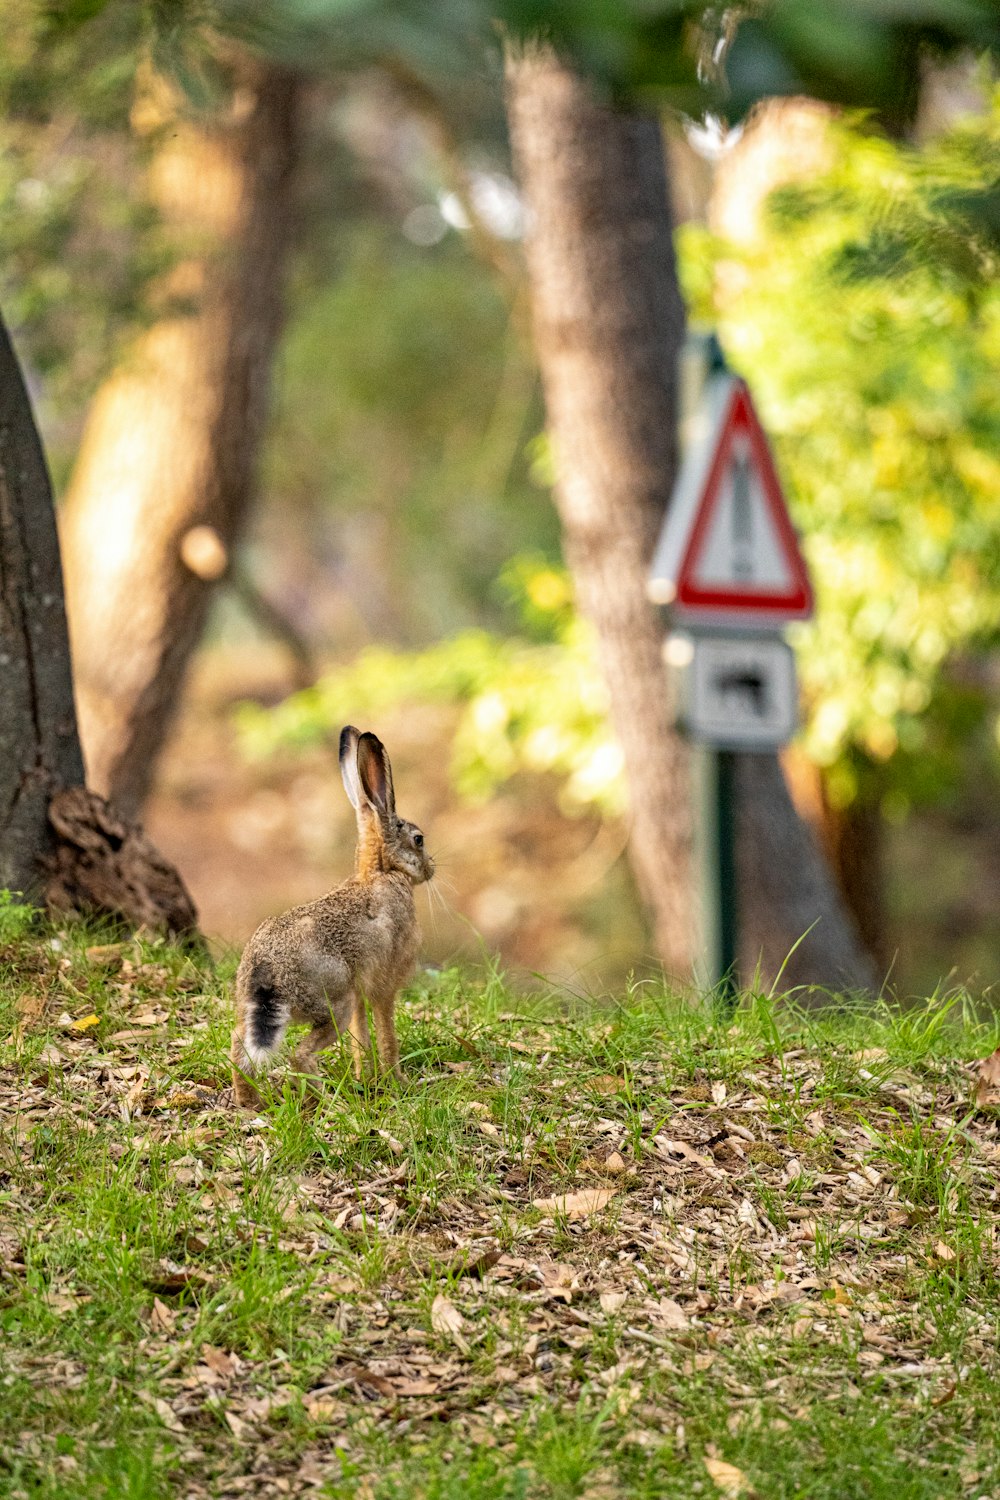 a rabbit is standing in the grass near a street sign